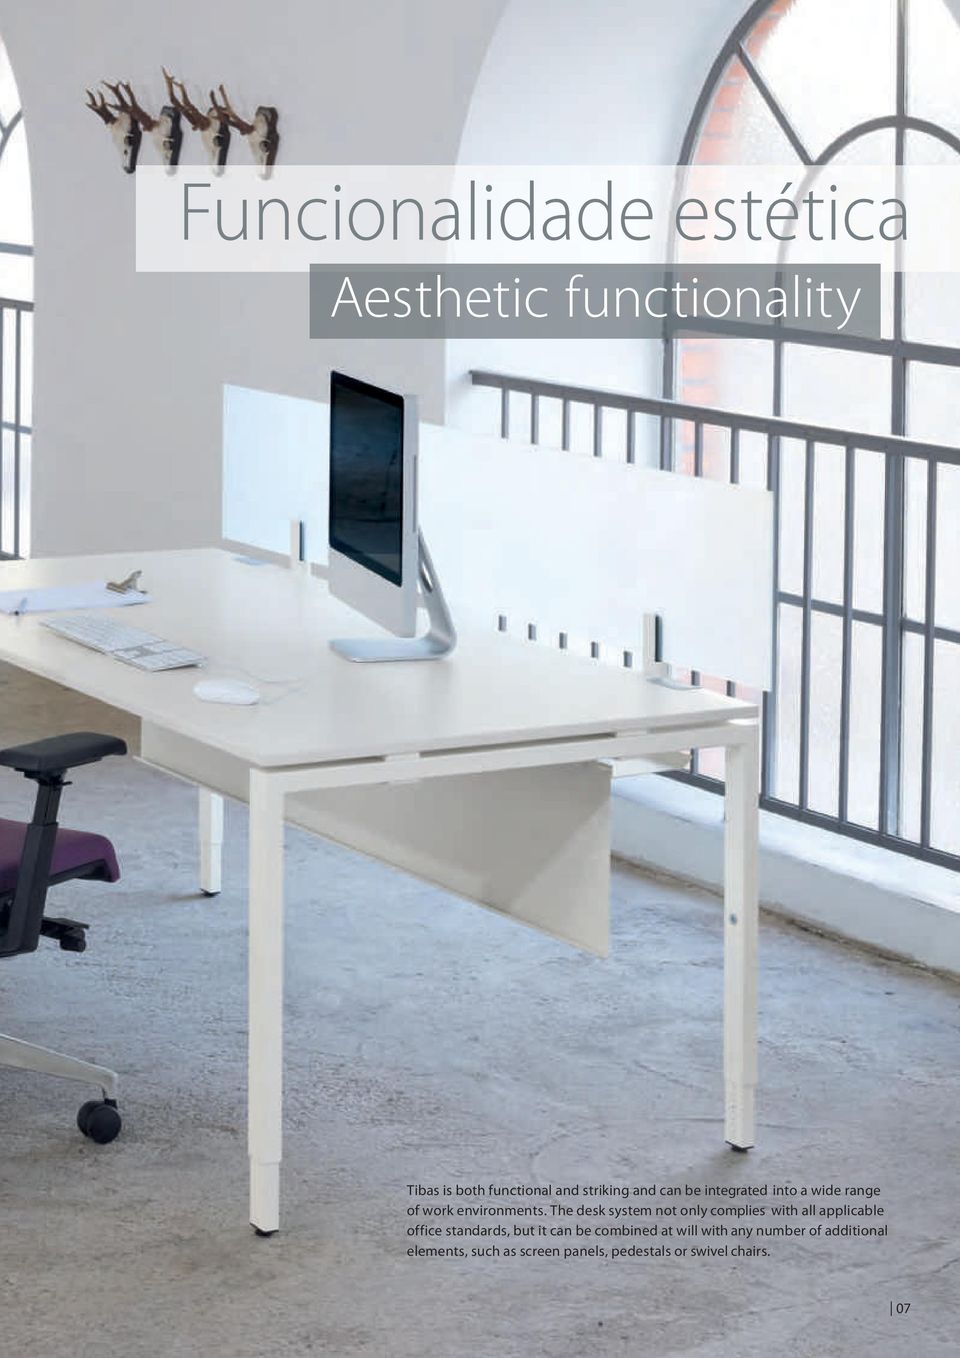 The desk system not only complies with all applicable office standards, but it can be